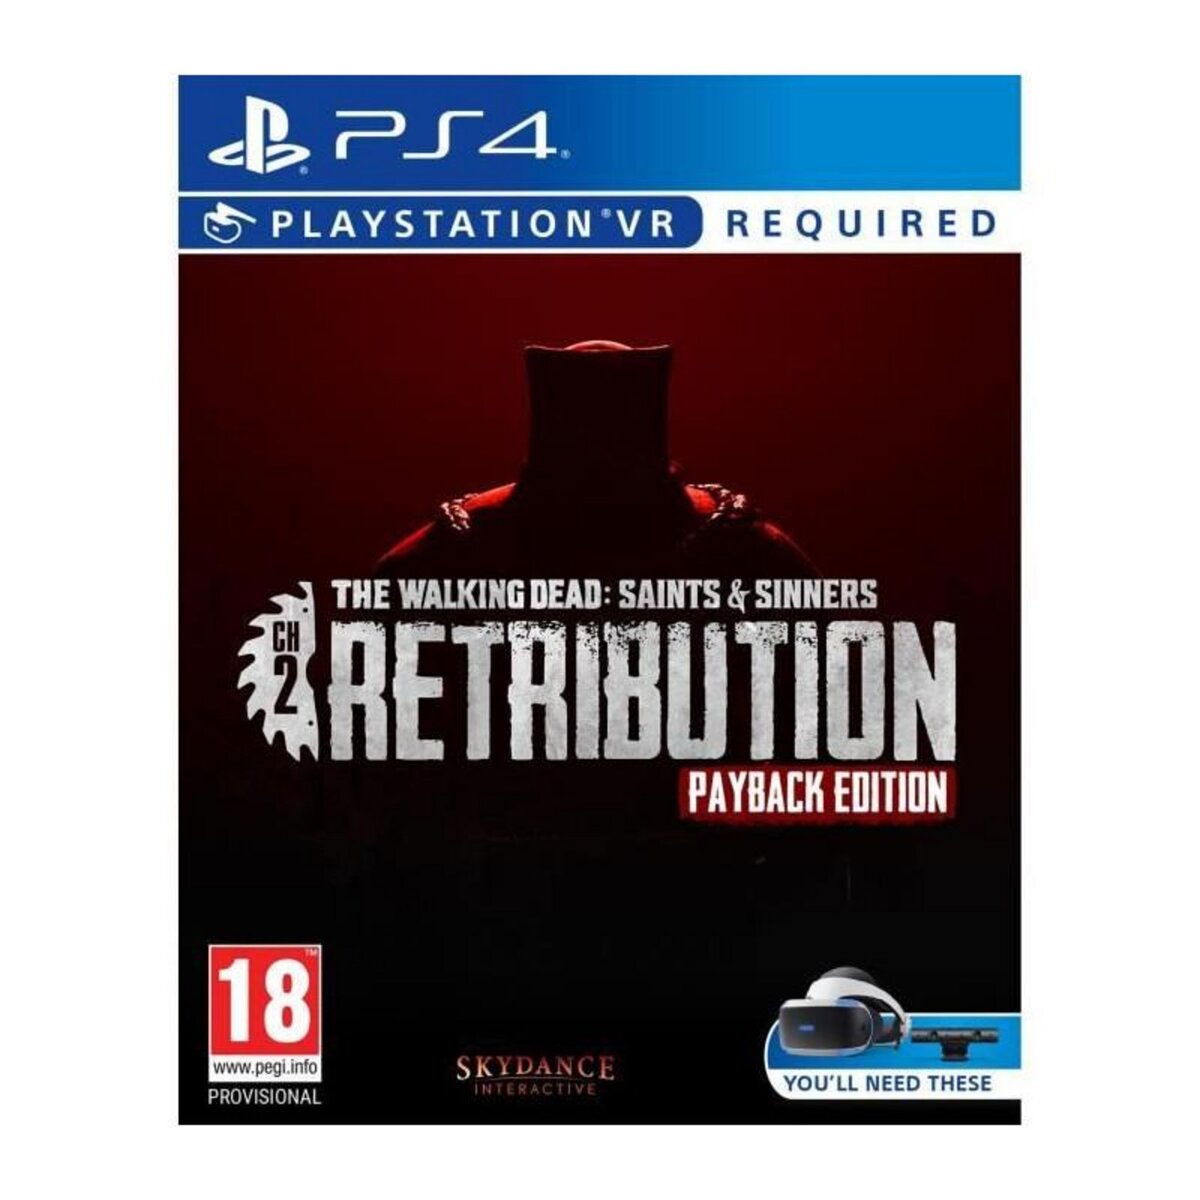 Just for games The Walking Dead Saints and Sinners Chapter 2 Retribution Payback Edition Jeu PS4 - PSVR Requis